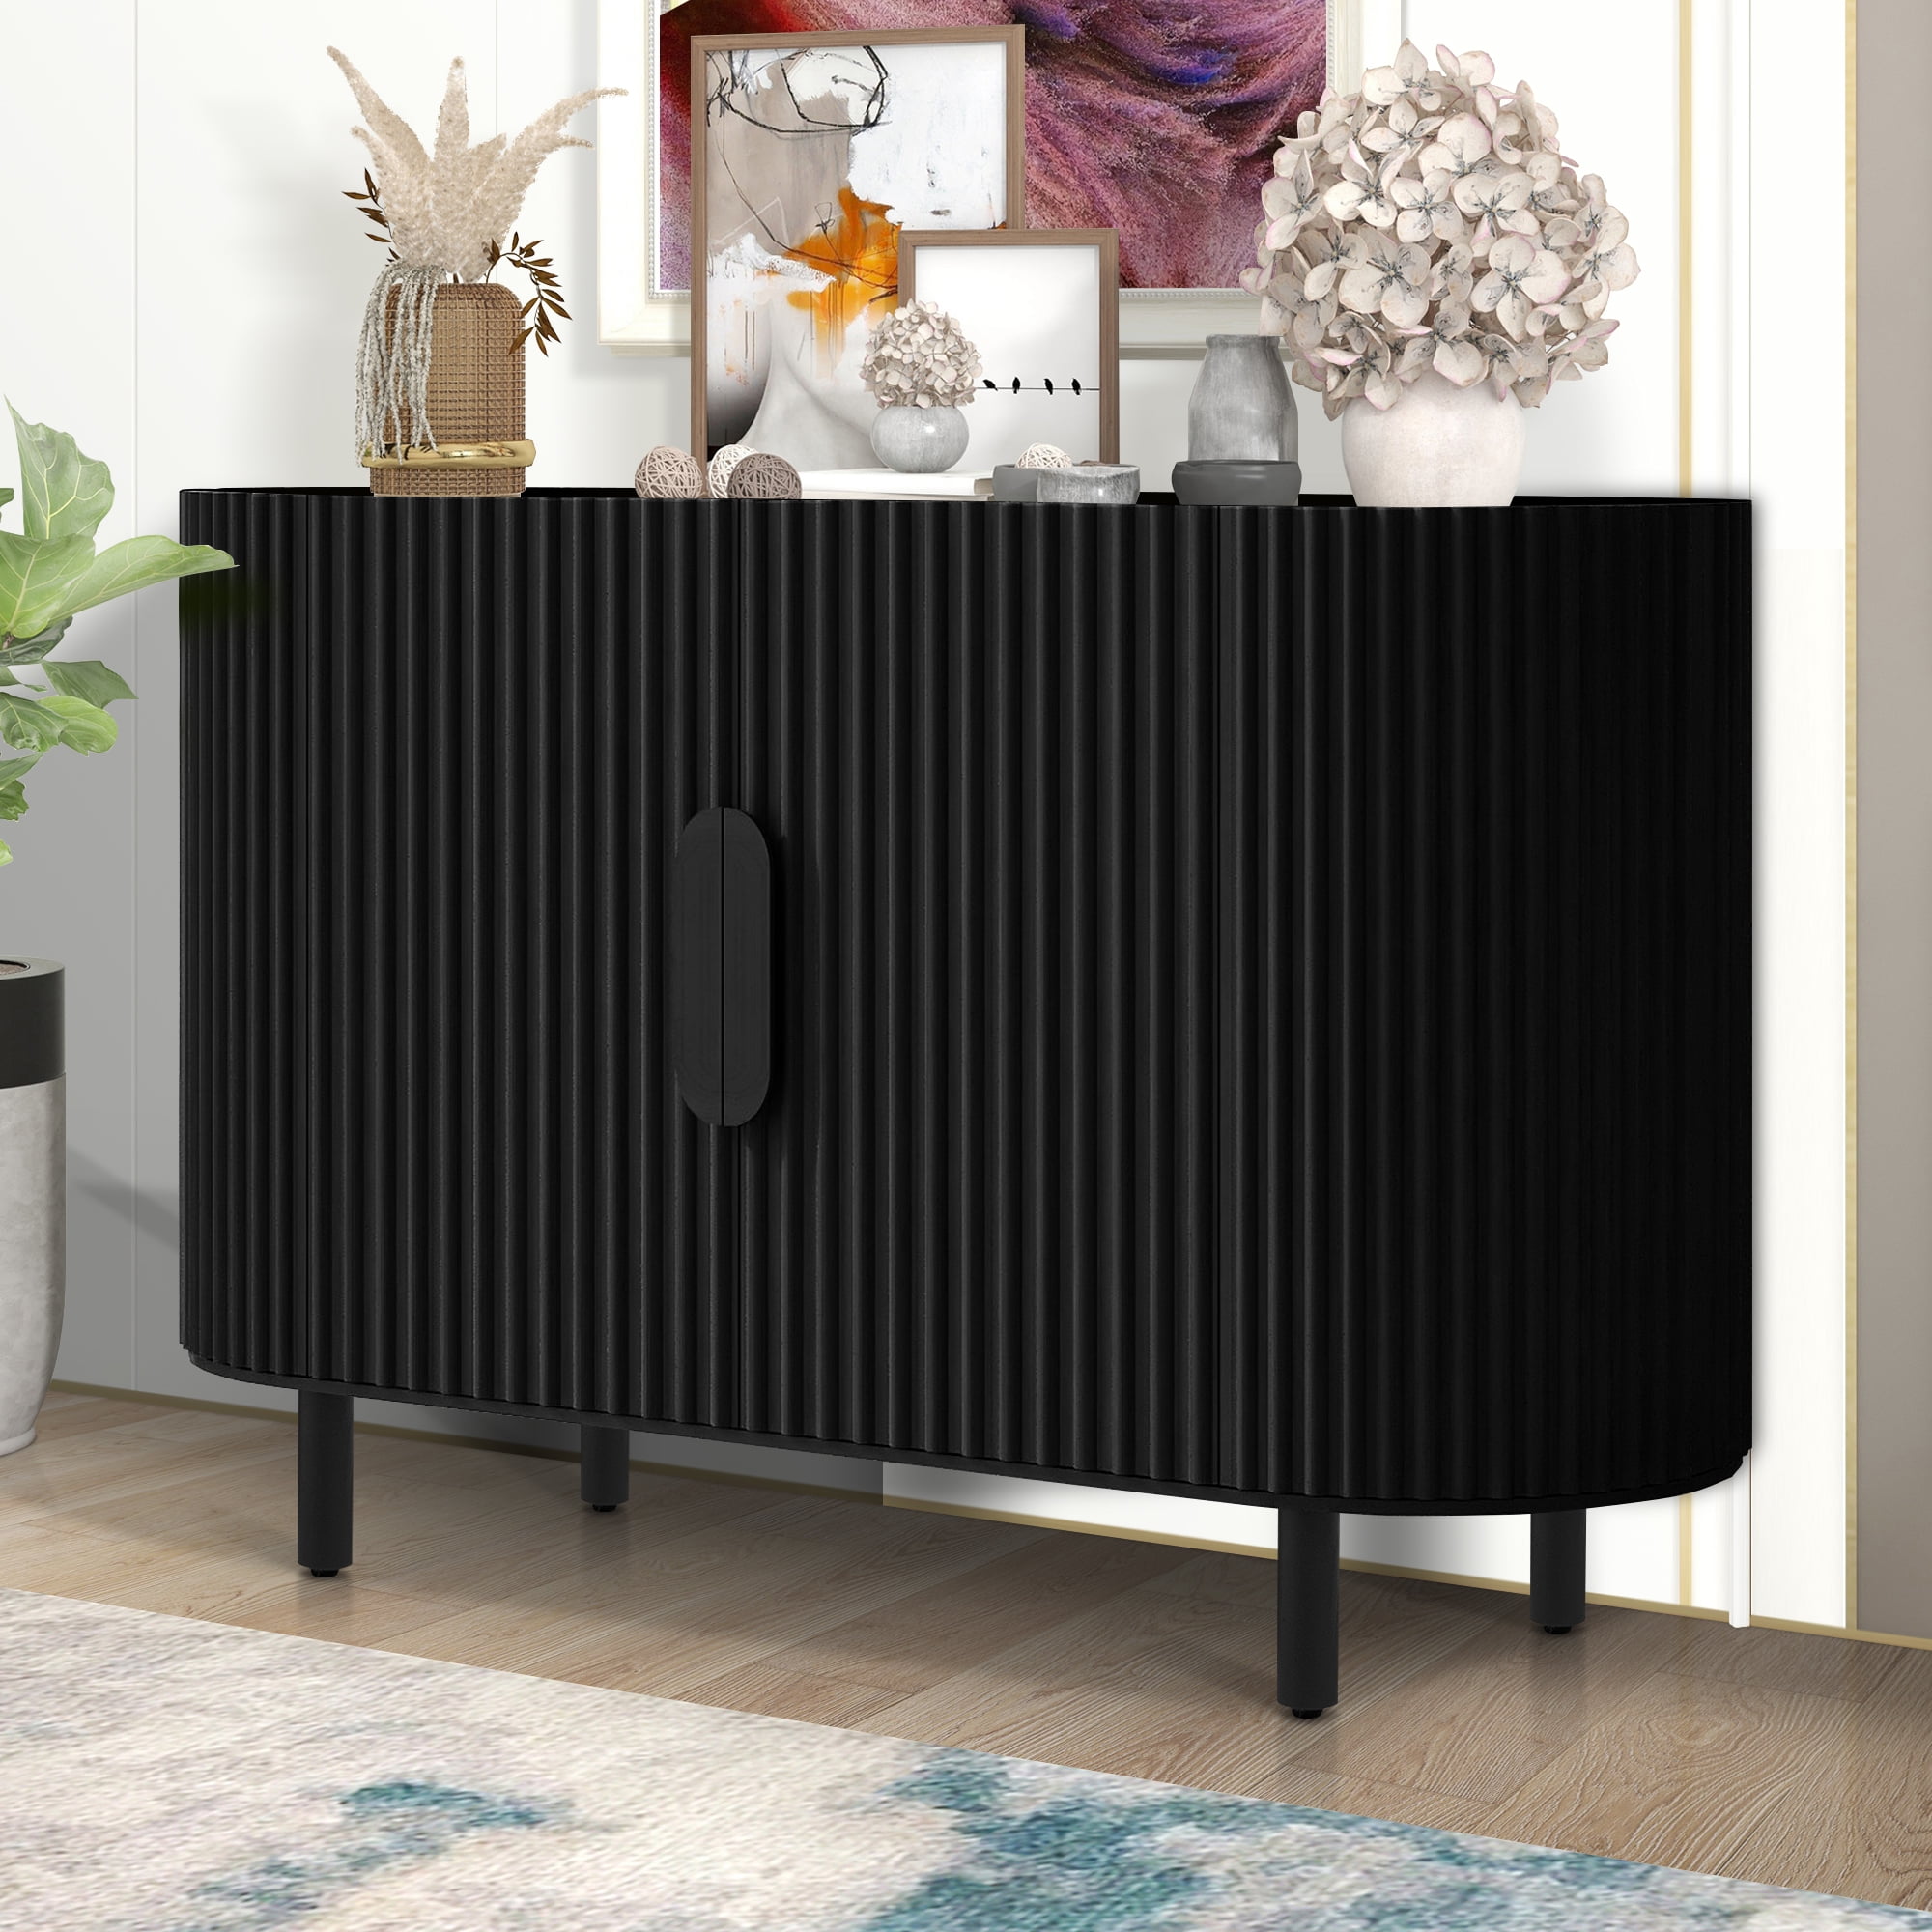 Black Accent Storage Cabinet, Curved Sideboard Cabinet, Atumon Storage ...